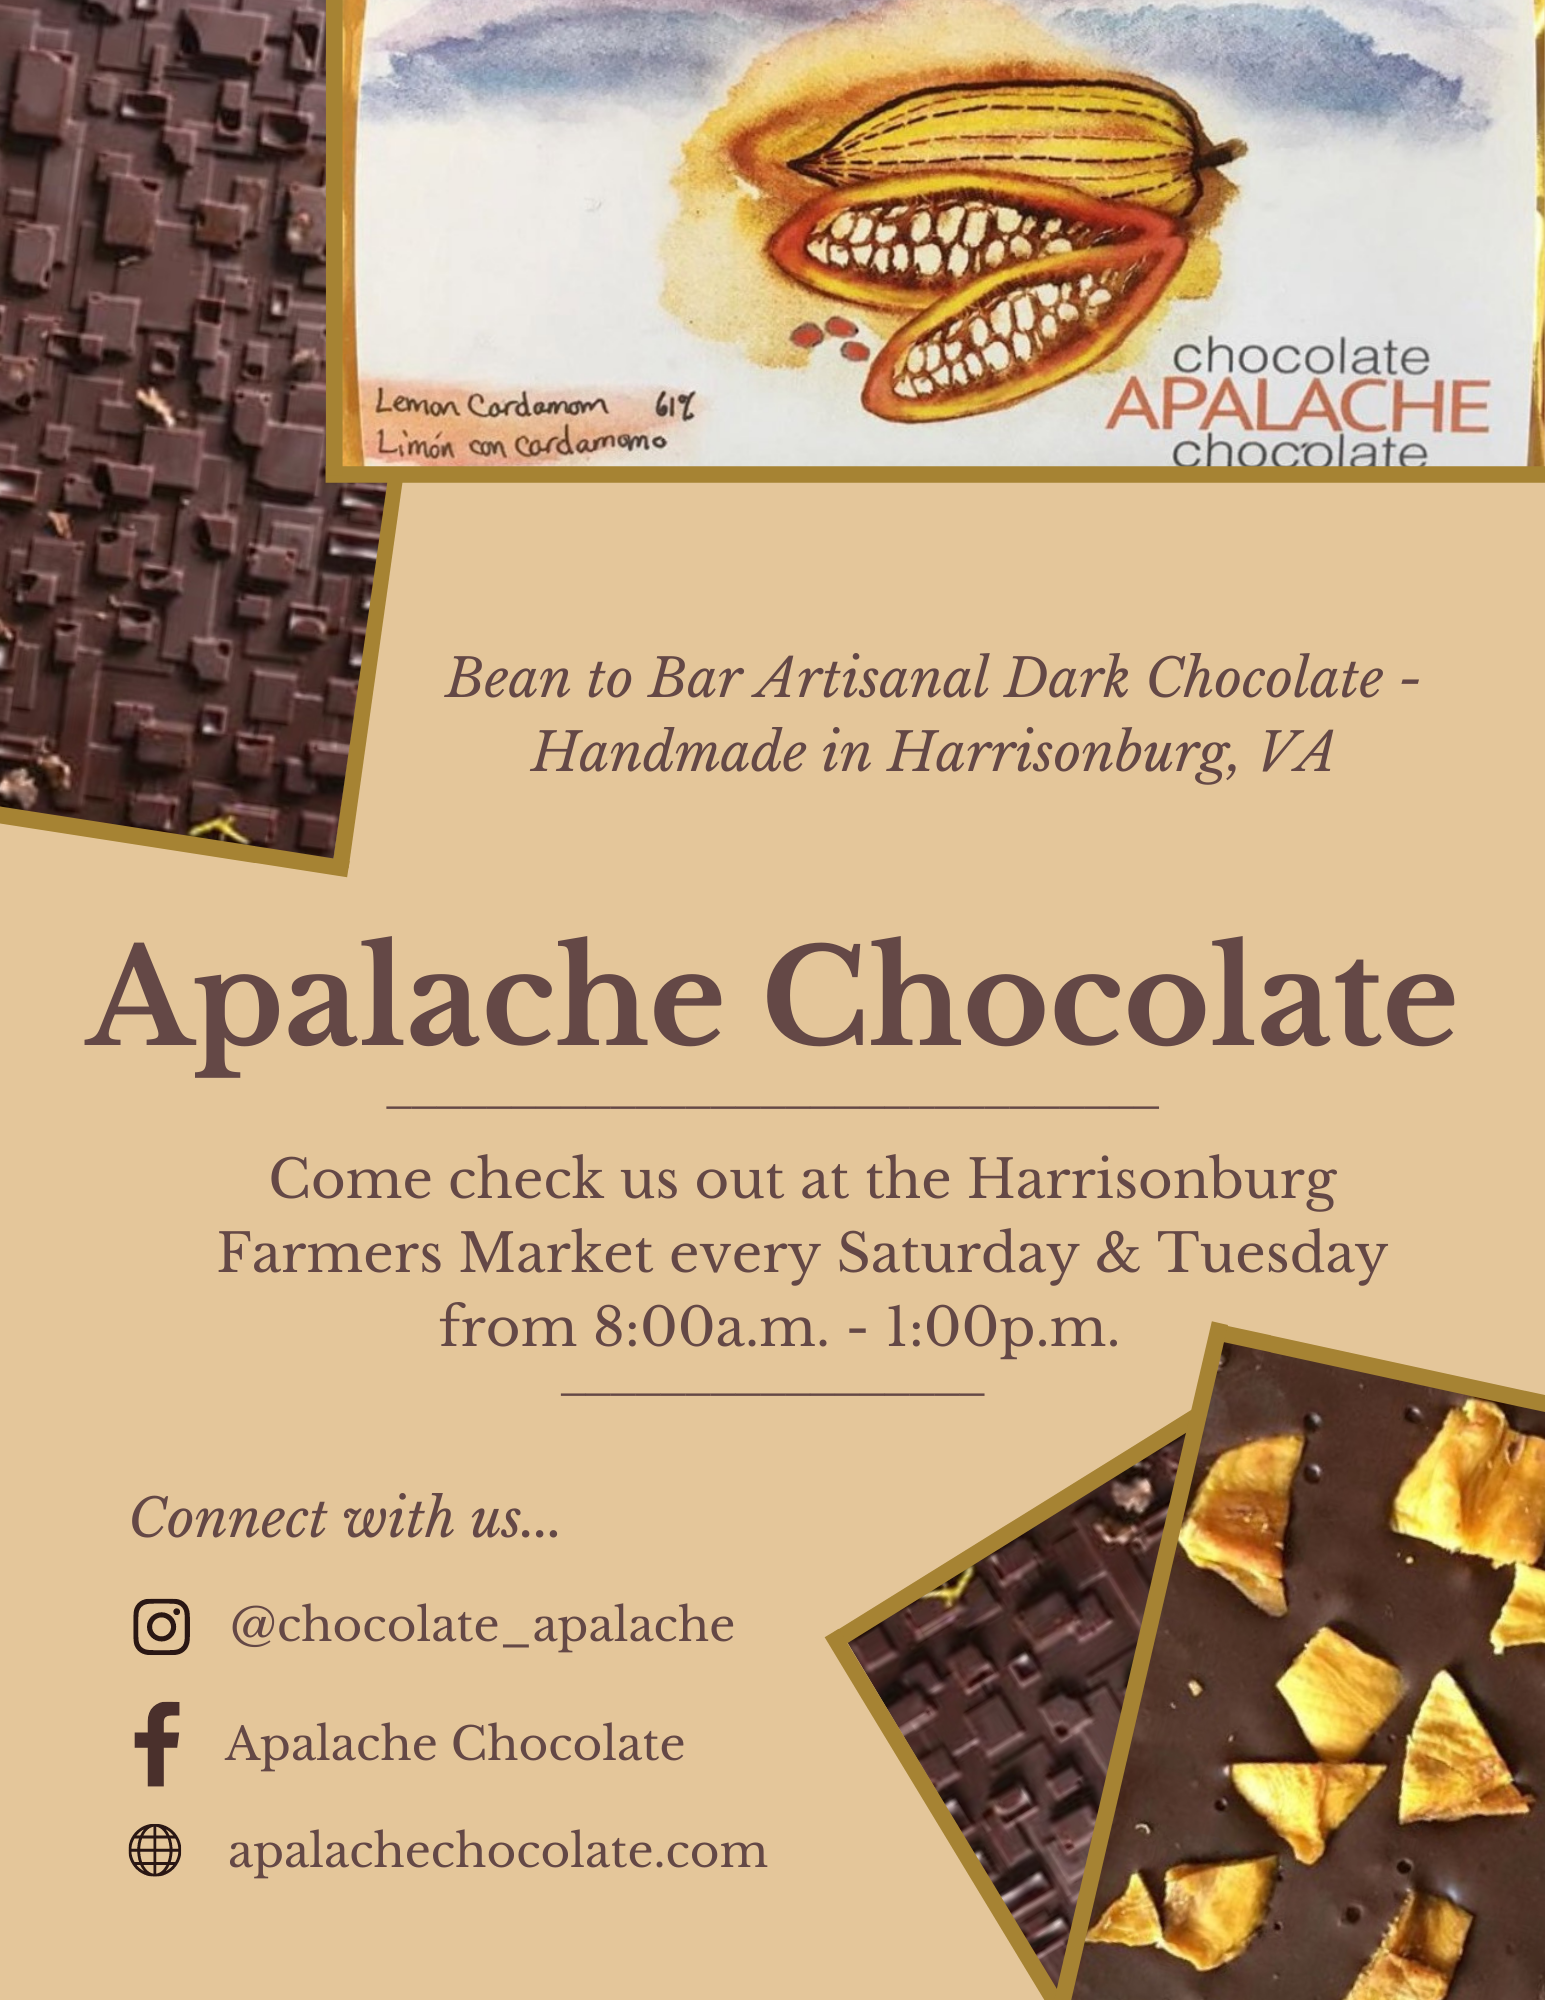 A poster advertismenting an Apalache Chocolate product.